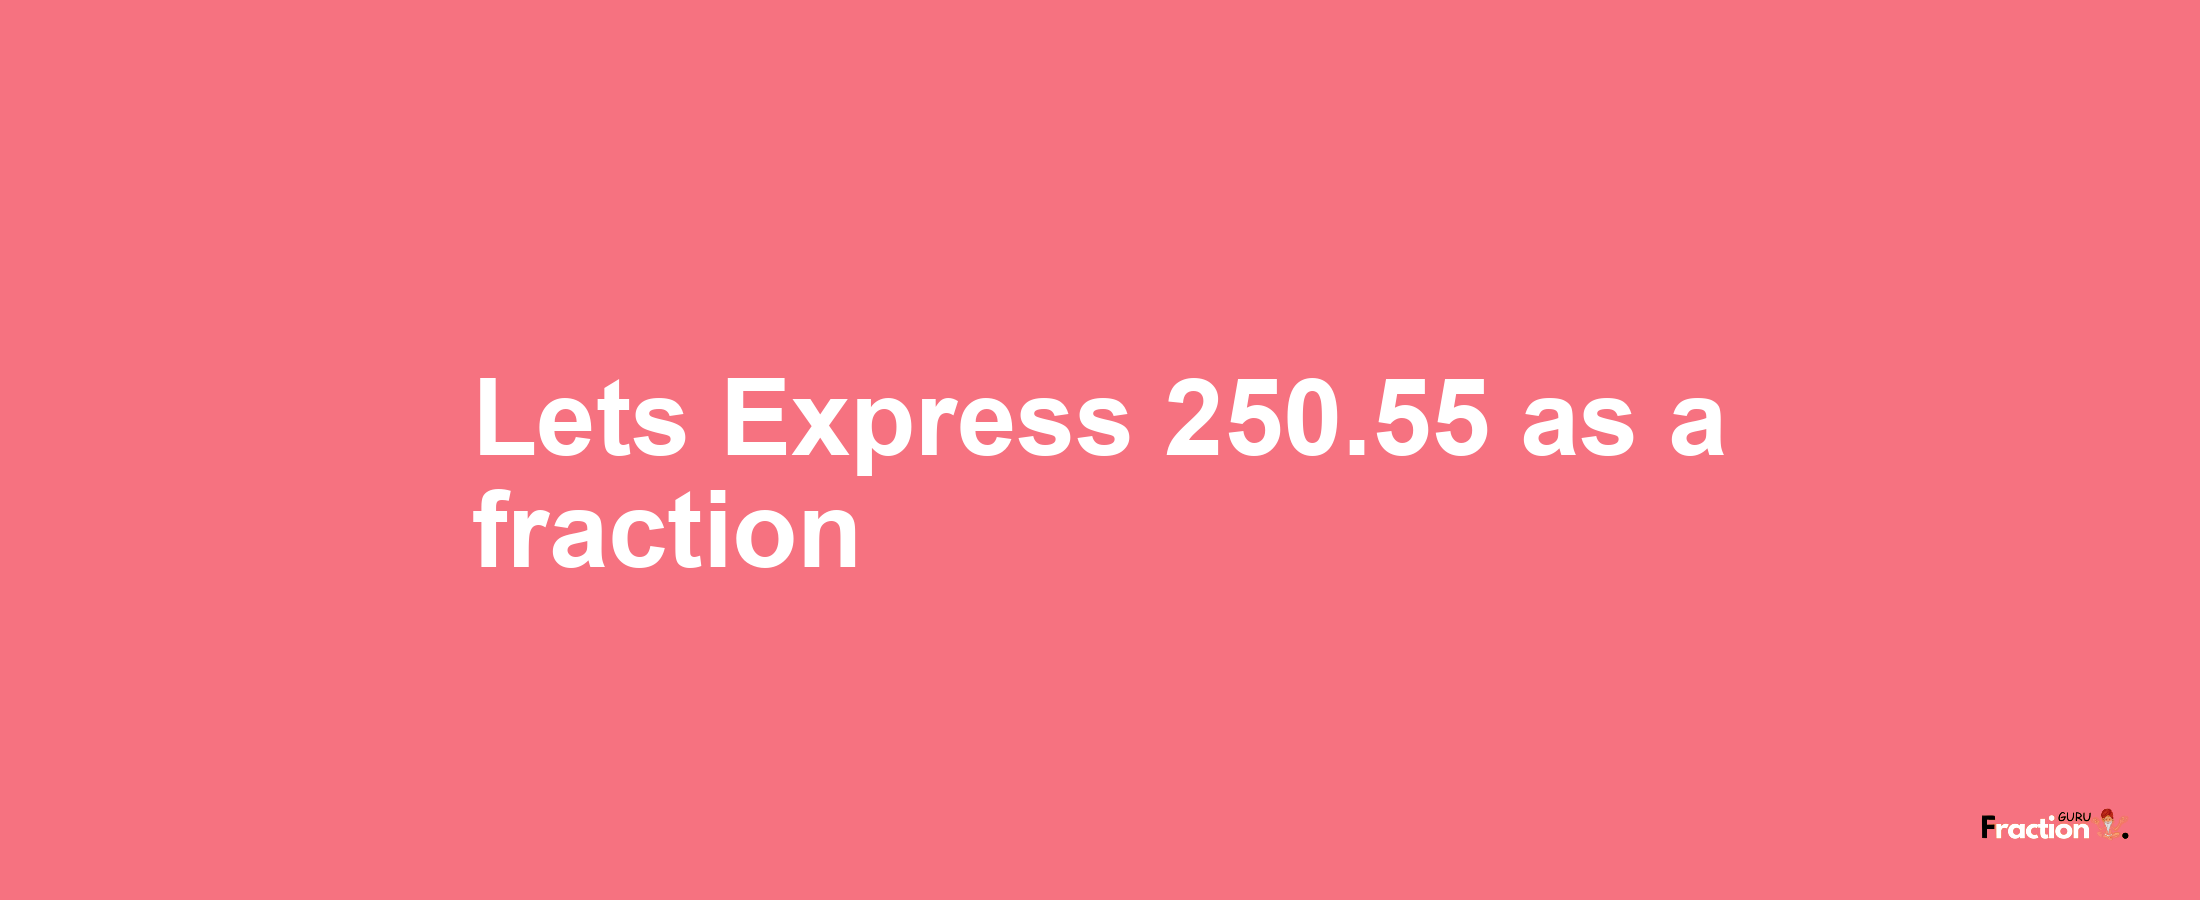 Lets Express 250.55 as afraction